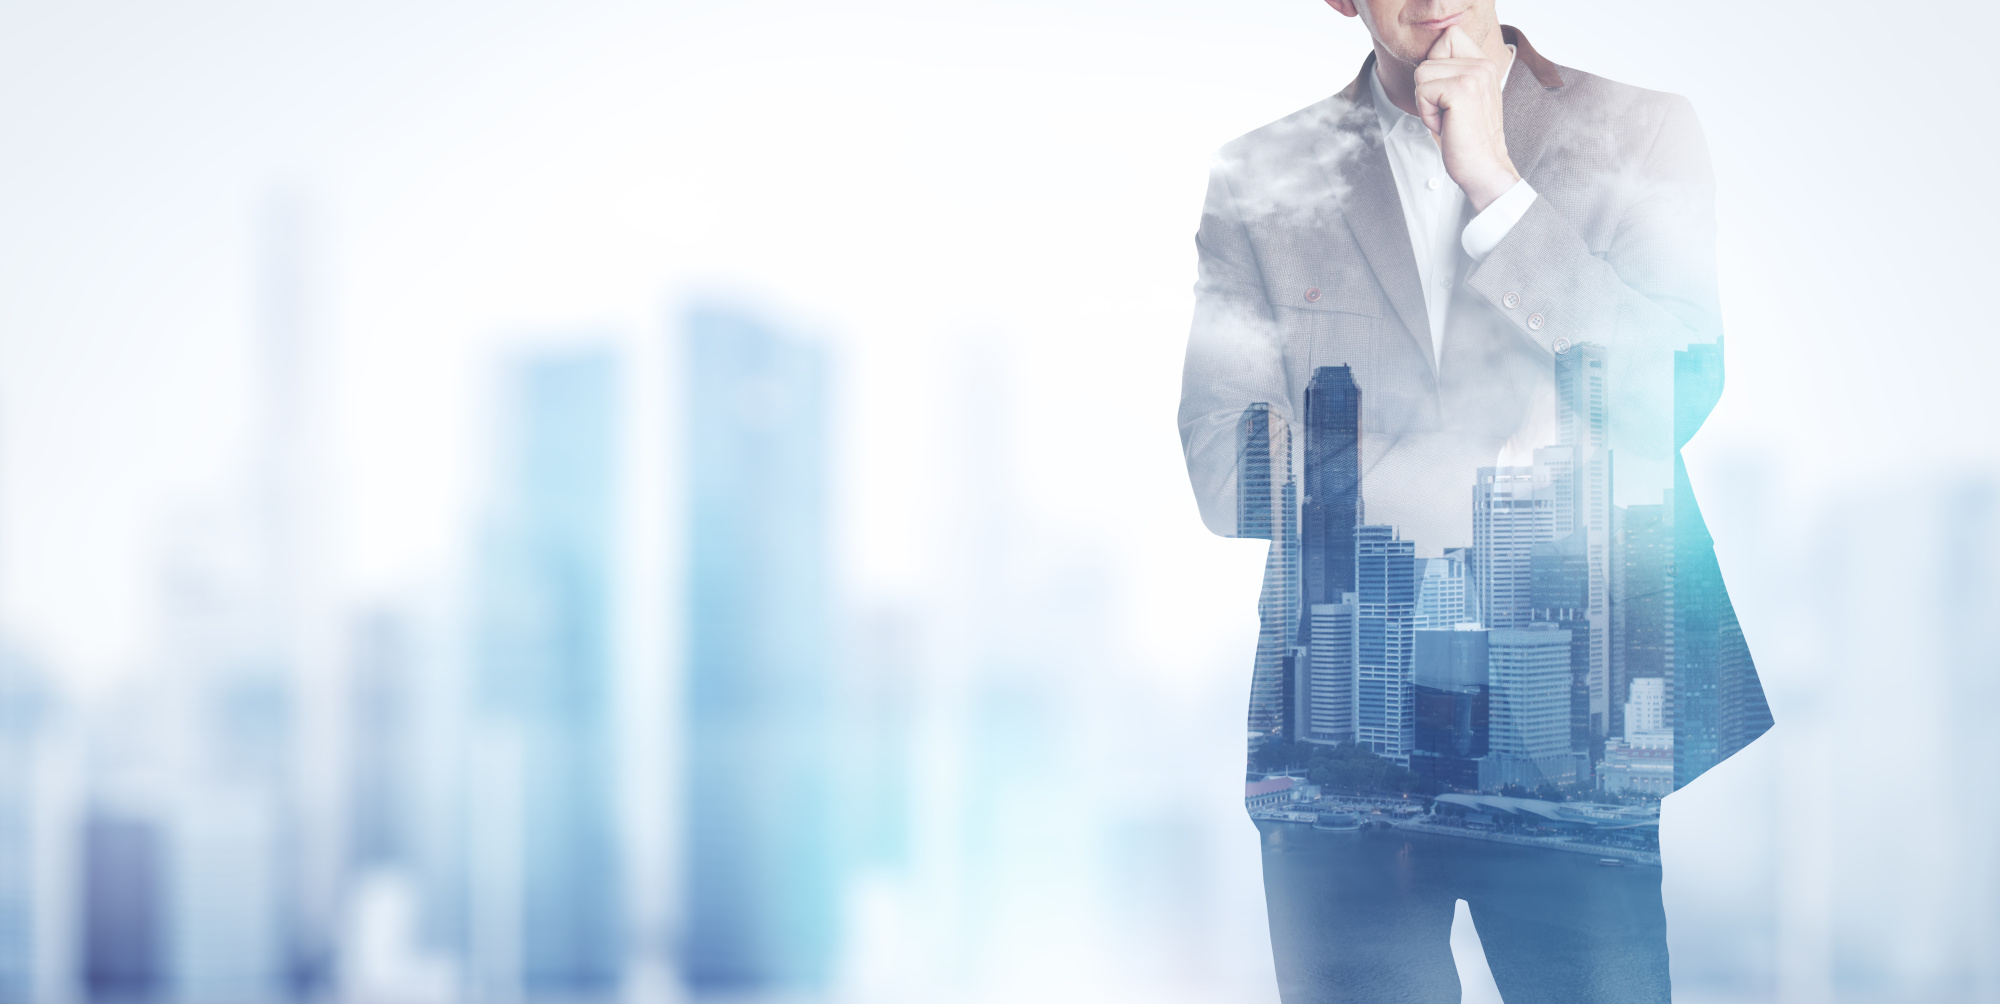 Compound image of a businessman with city skyline image showing through